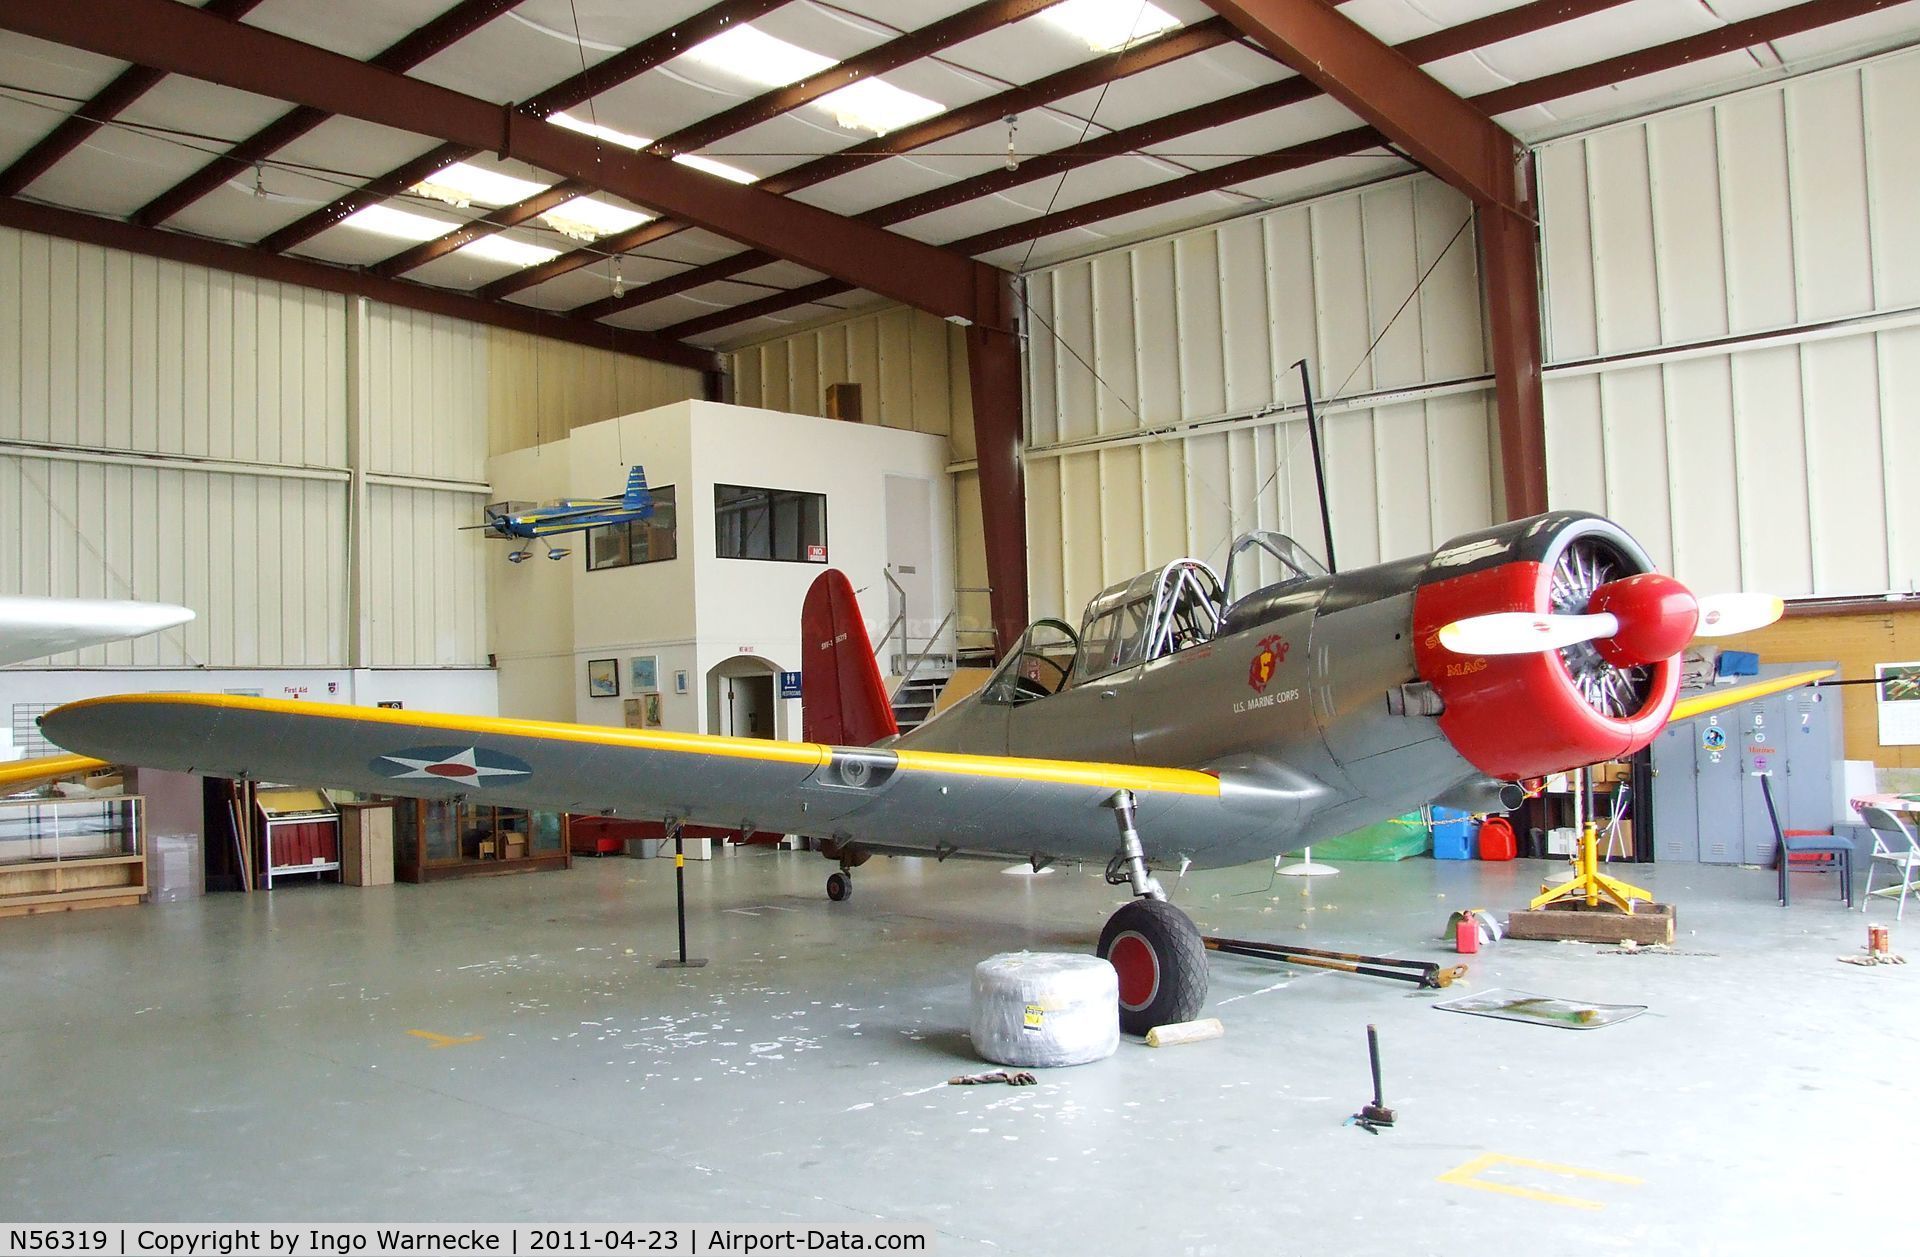 N56319, 1941 Consolidated Vultee BT-13A C/N 2167, Vultee BT-13A Valiant at the Estrella Warbirds  Museum, Paso Robles CA